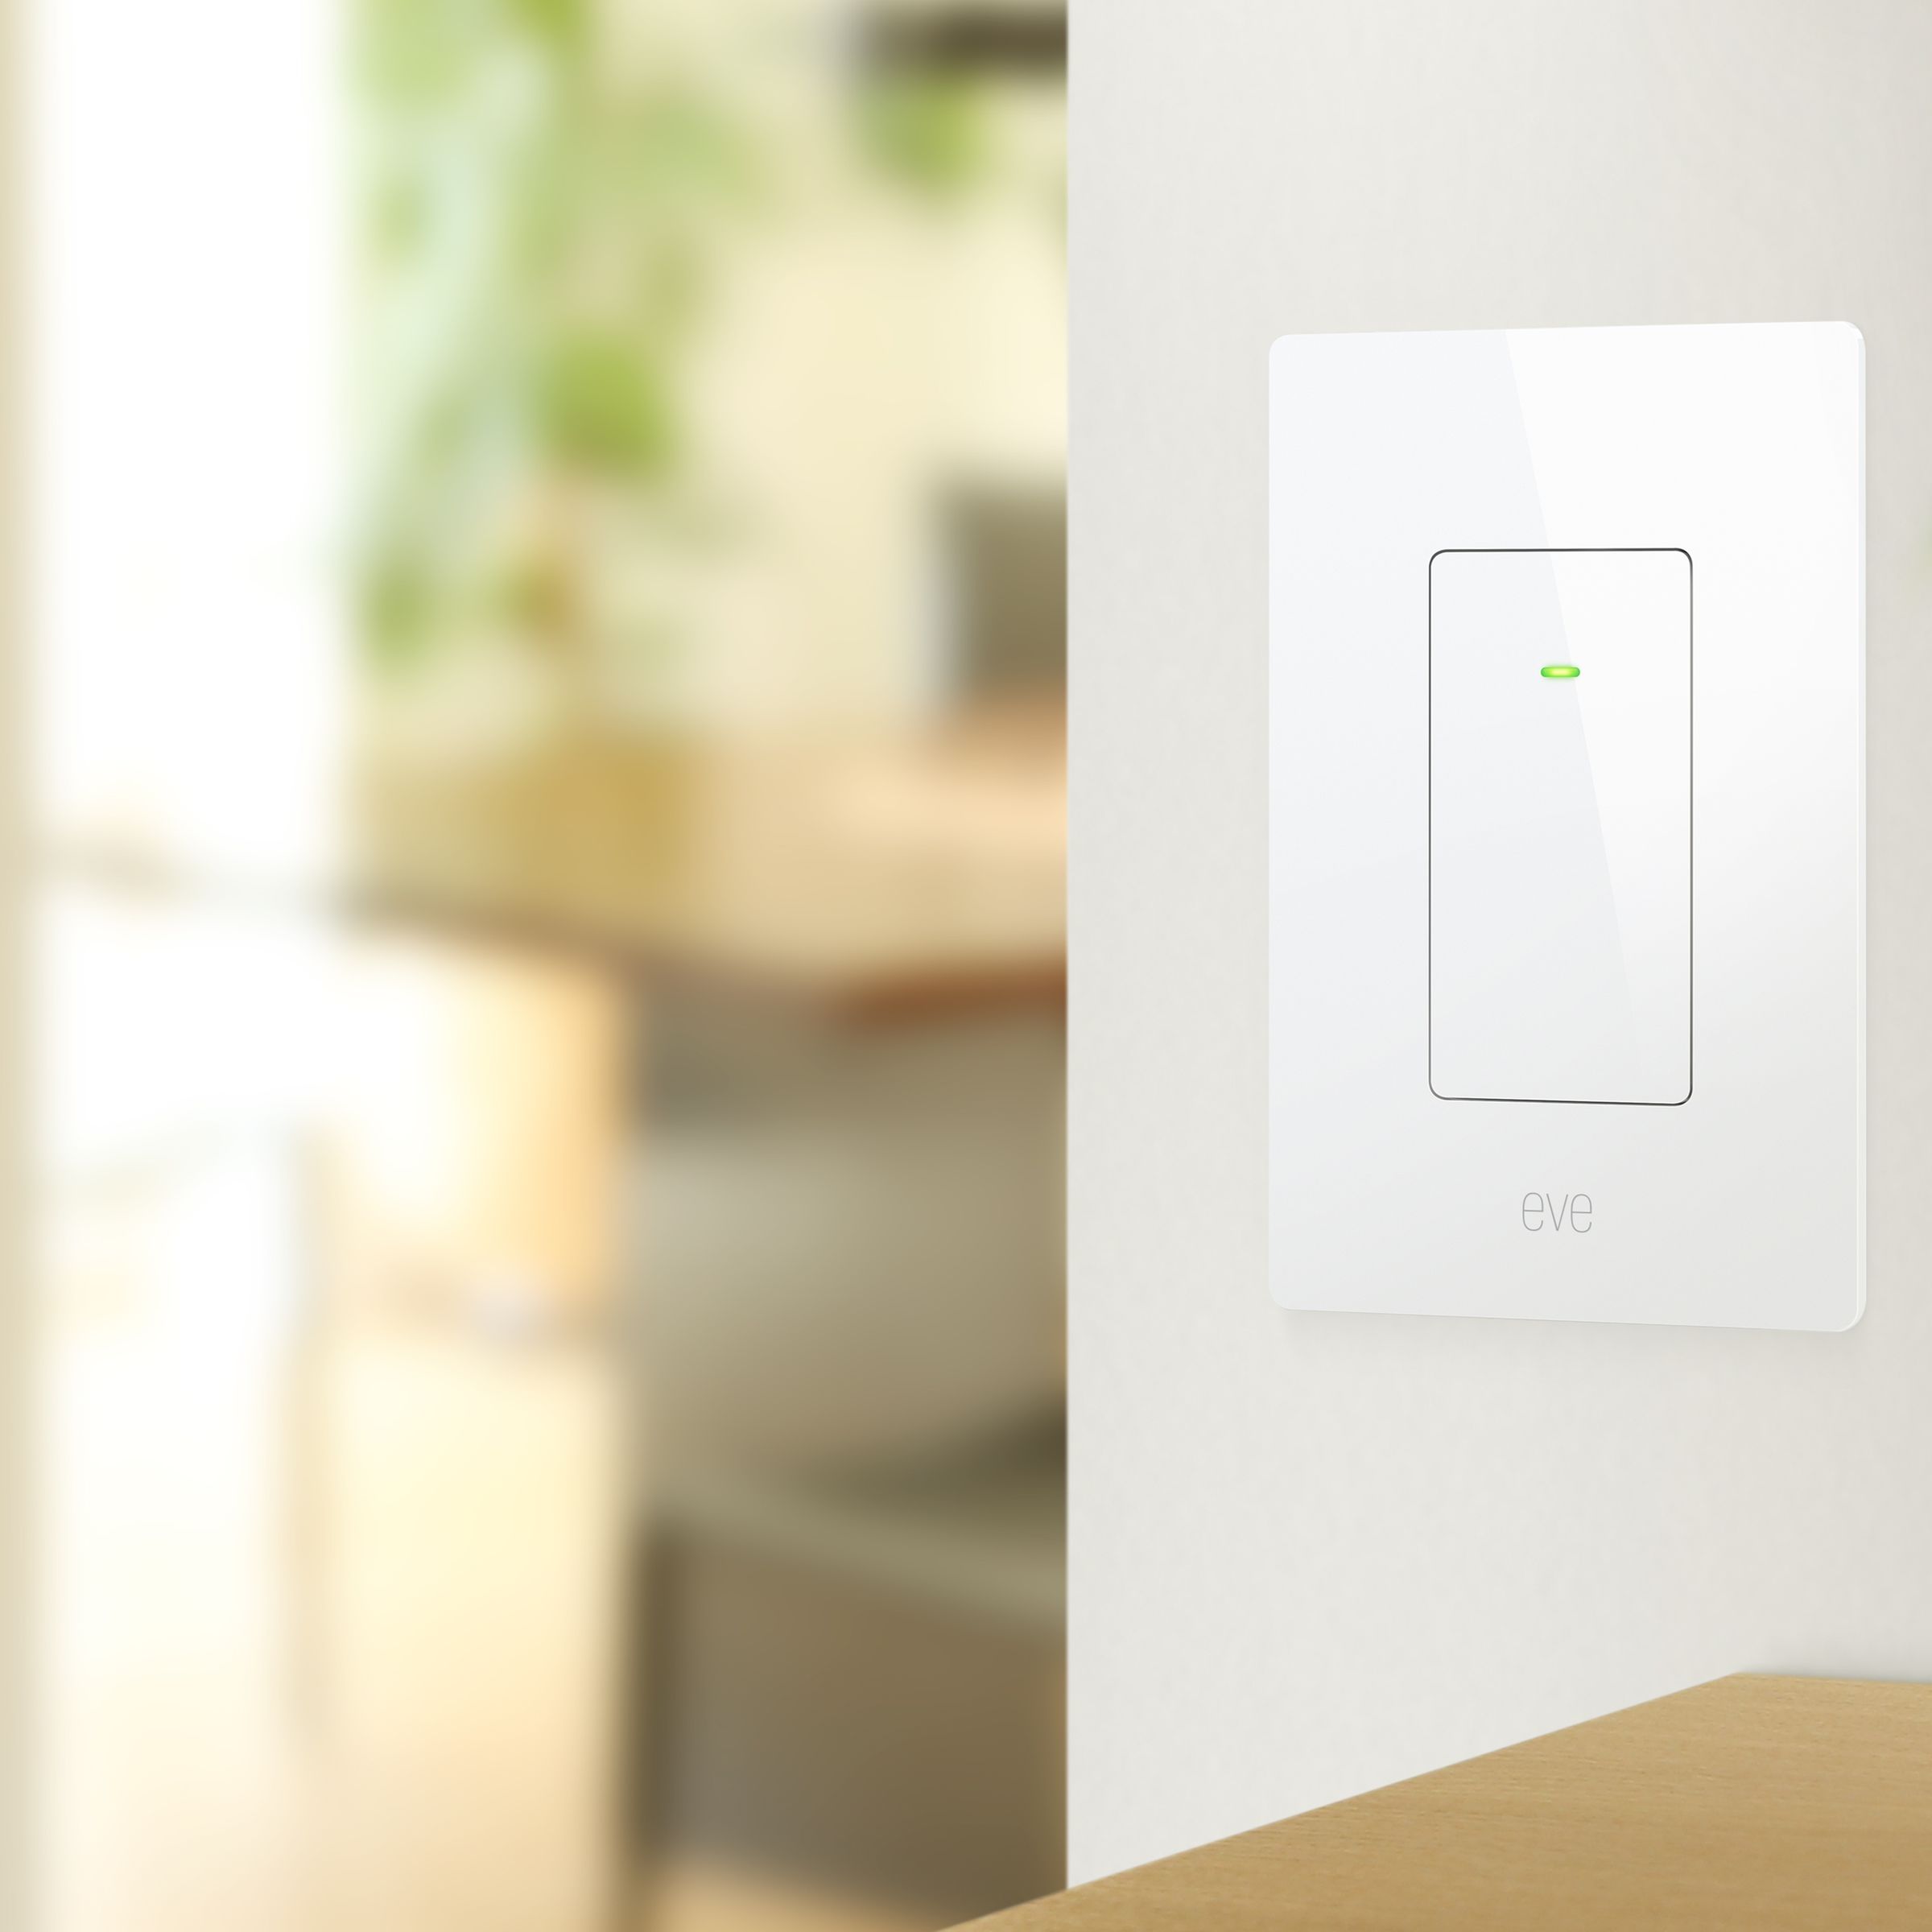 Eve’s latest light switch has Thread and will work with a new Eve Android app.